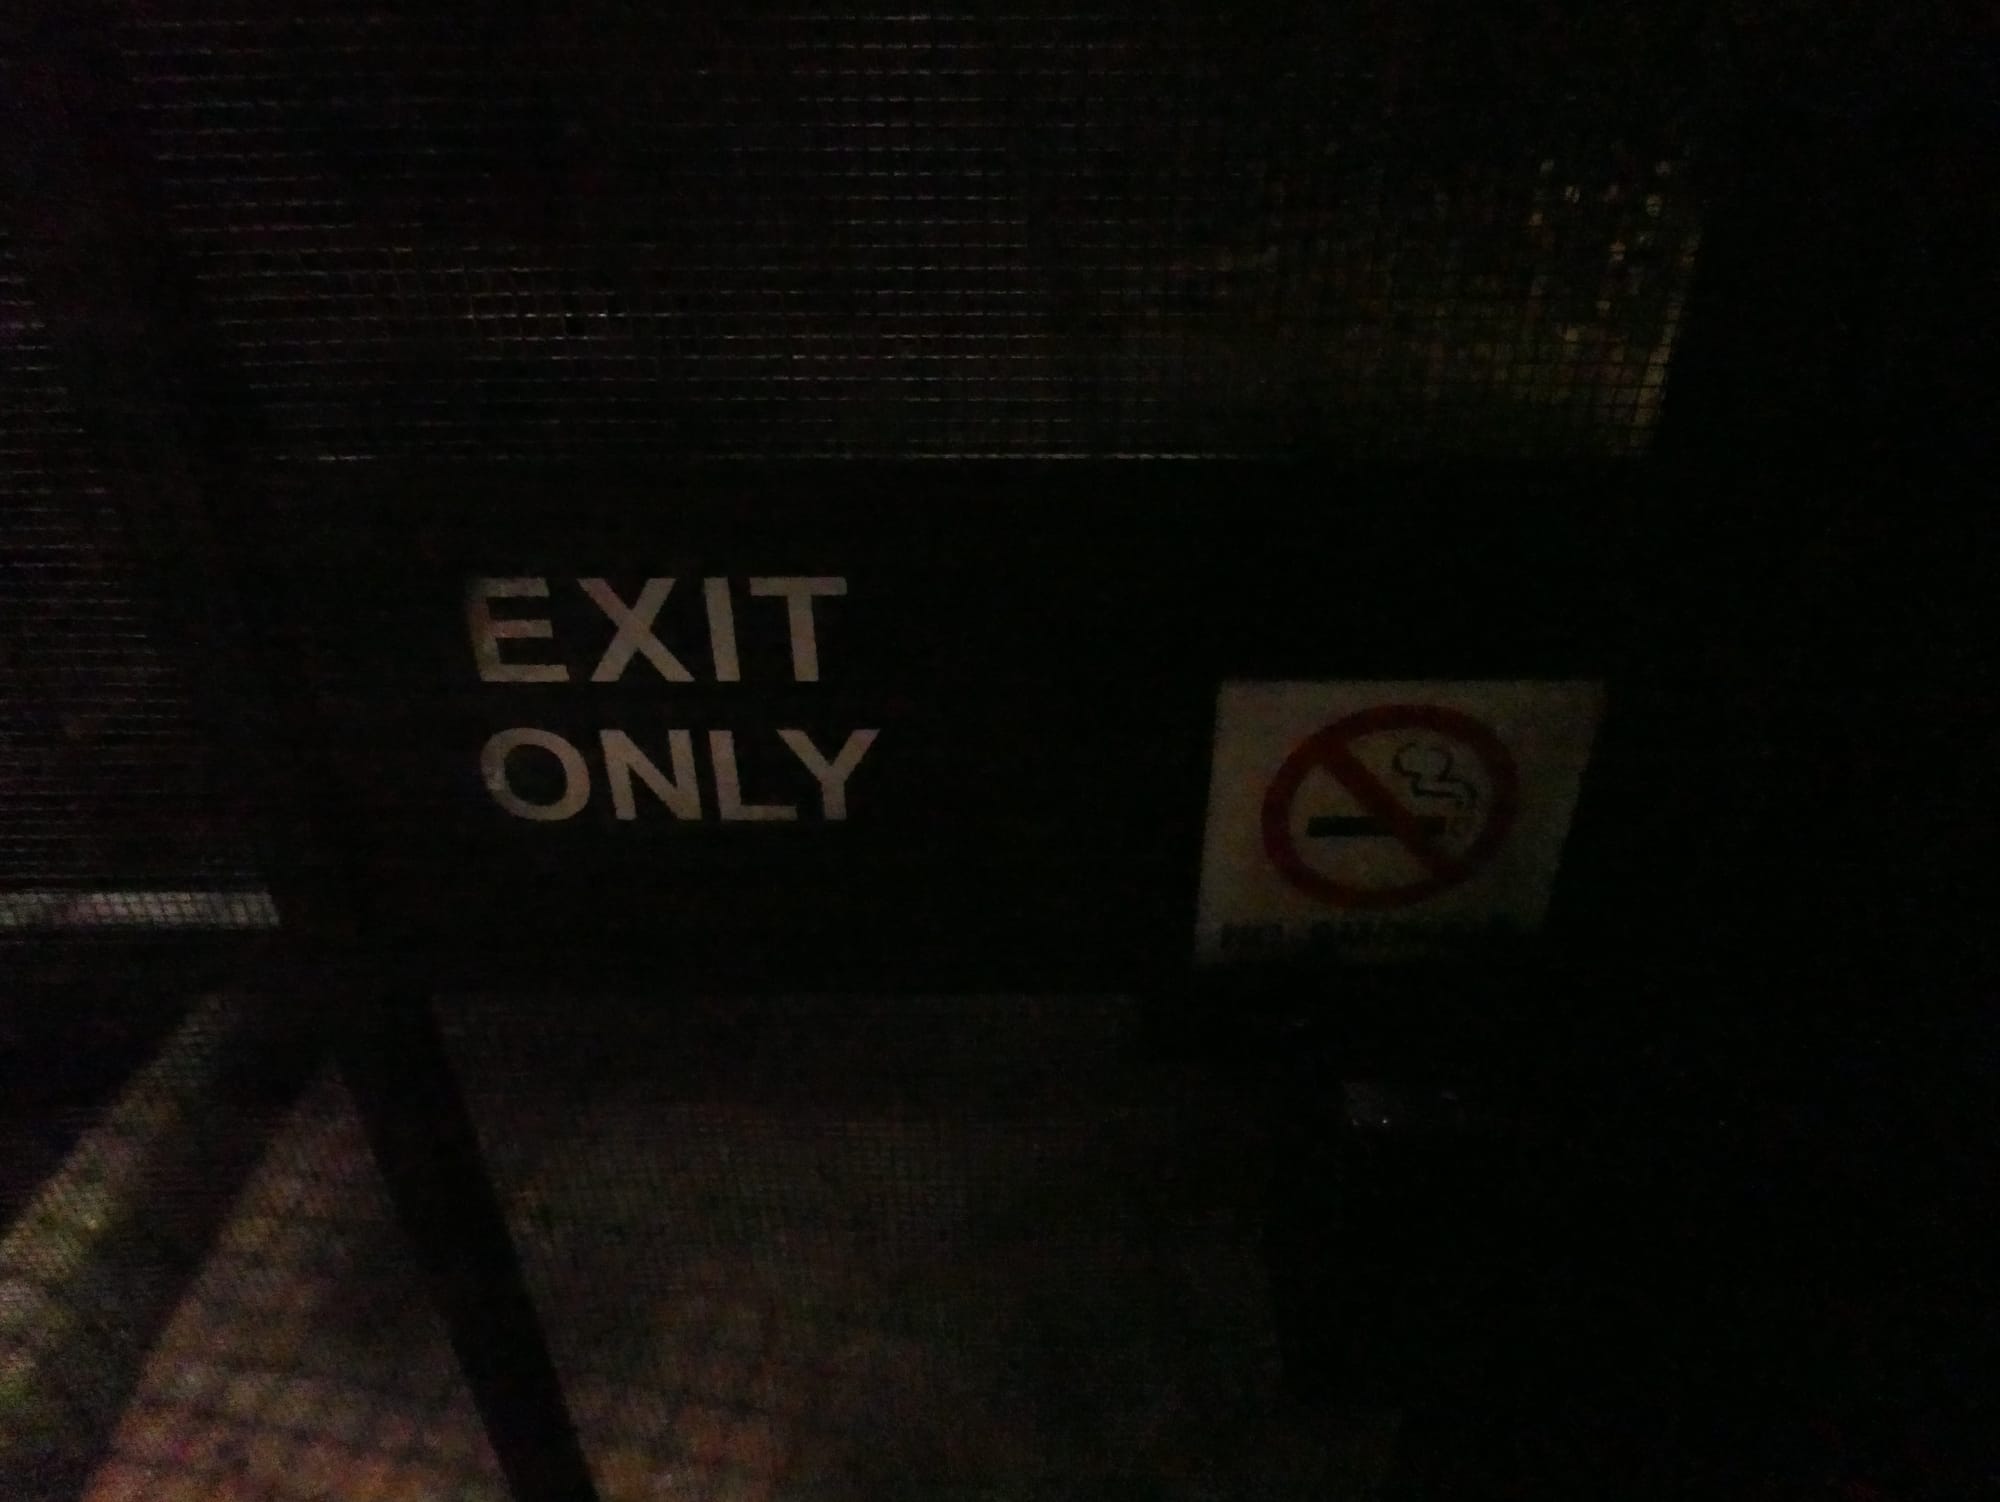 Photo by Author — exit only, but you can enter this way — Singapore Zoo Night Safari, Singapore